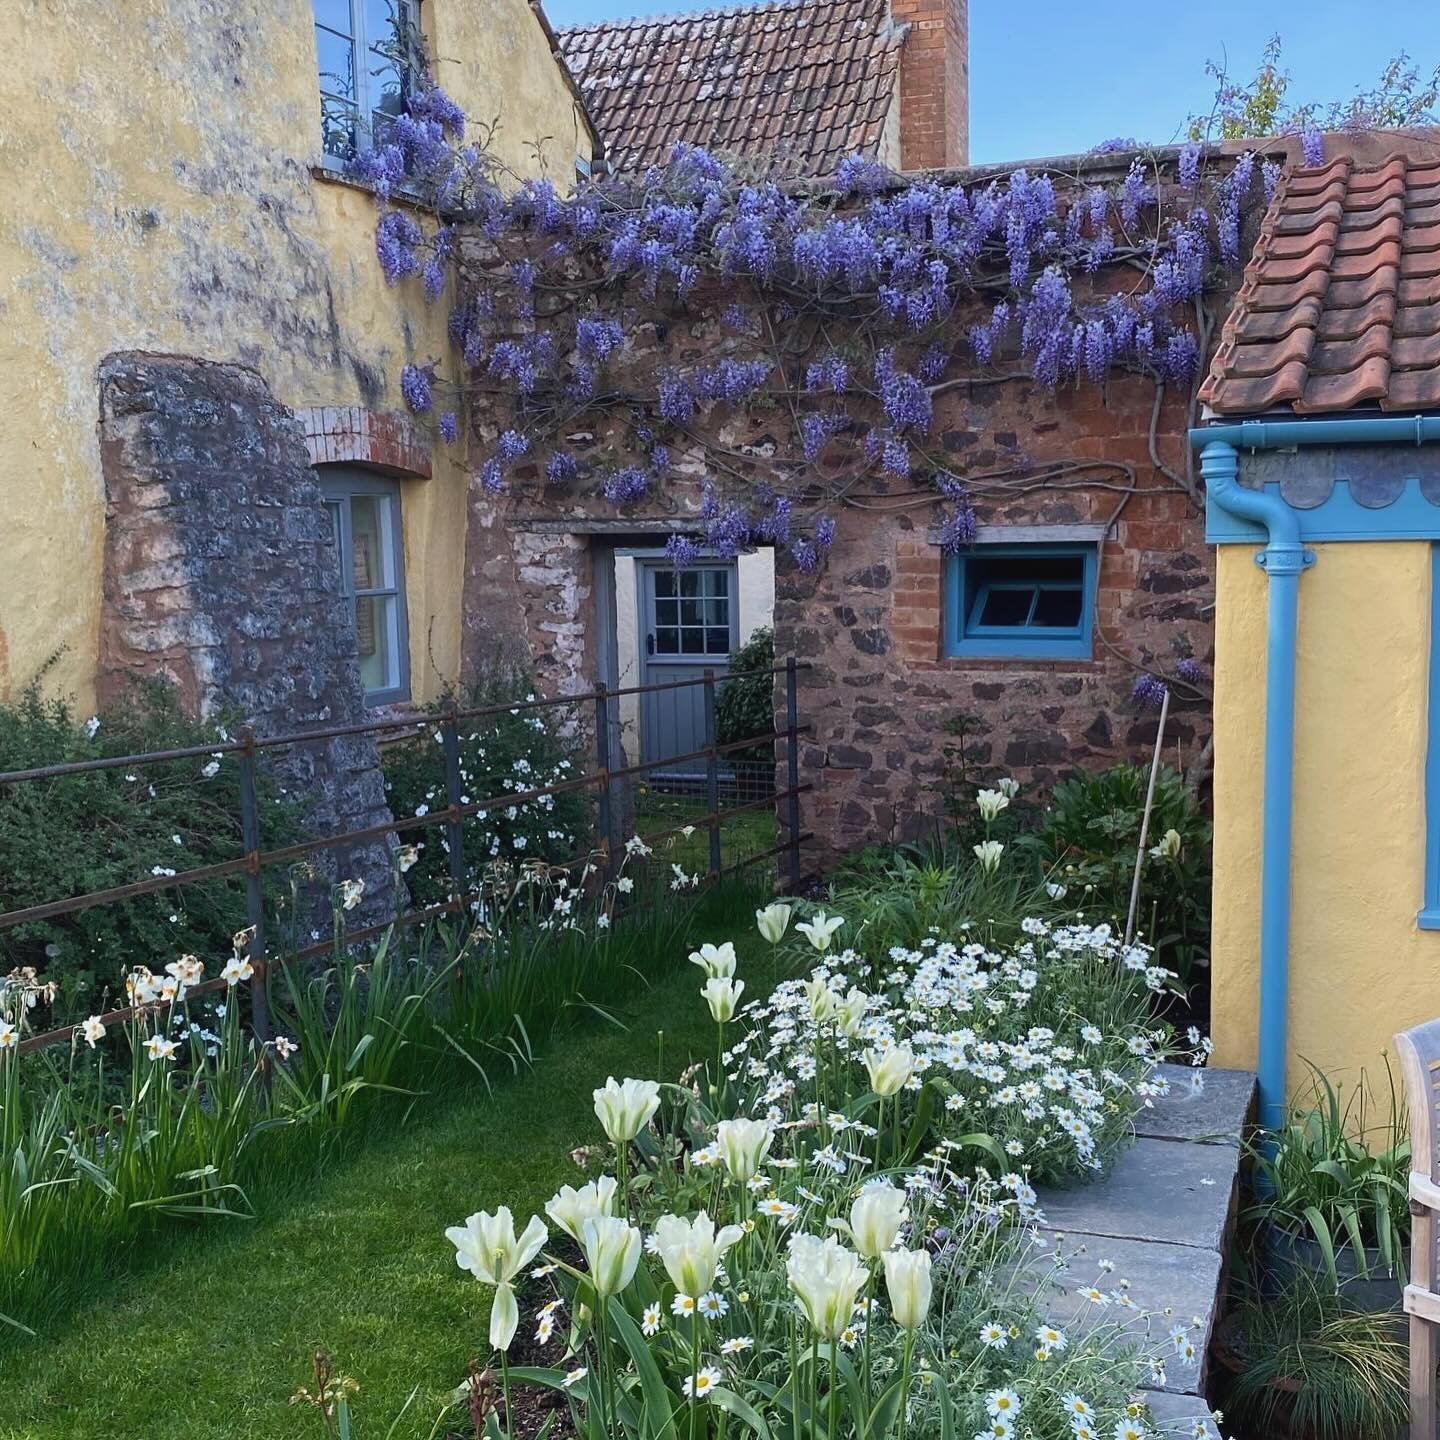 Last year at the pottery garden. Spring green tulips and wisteria looking 🫶🏼. This year everything seems to be out of whack timing wise with the tulips and daffies all over the place. But the alliums, perennials and biennials are bulking up nicely 